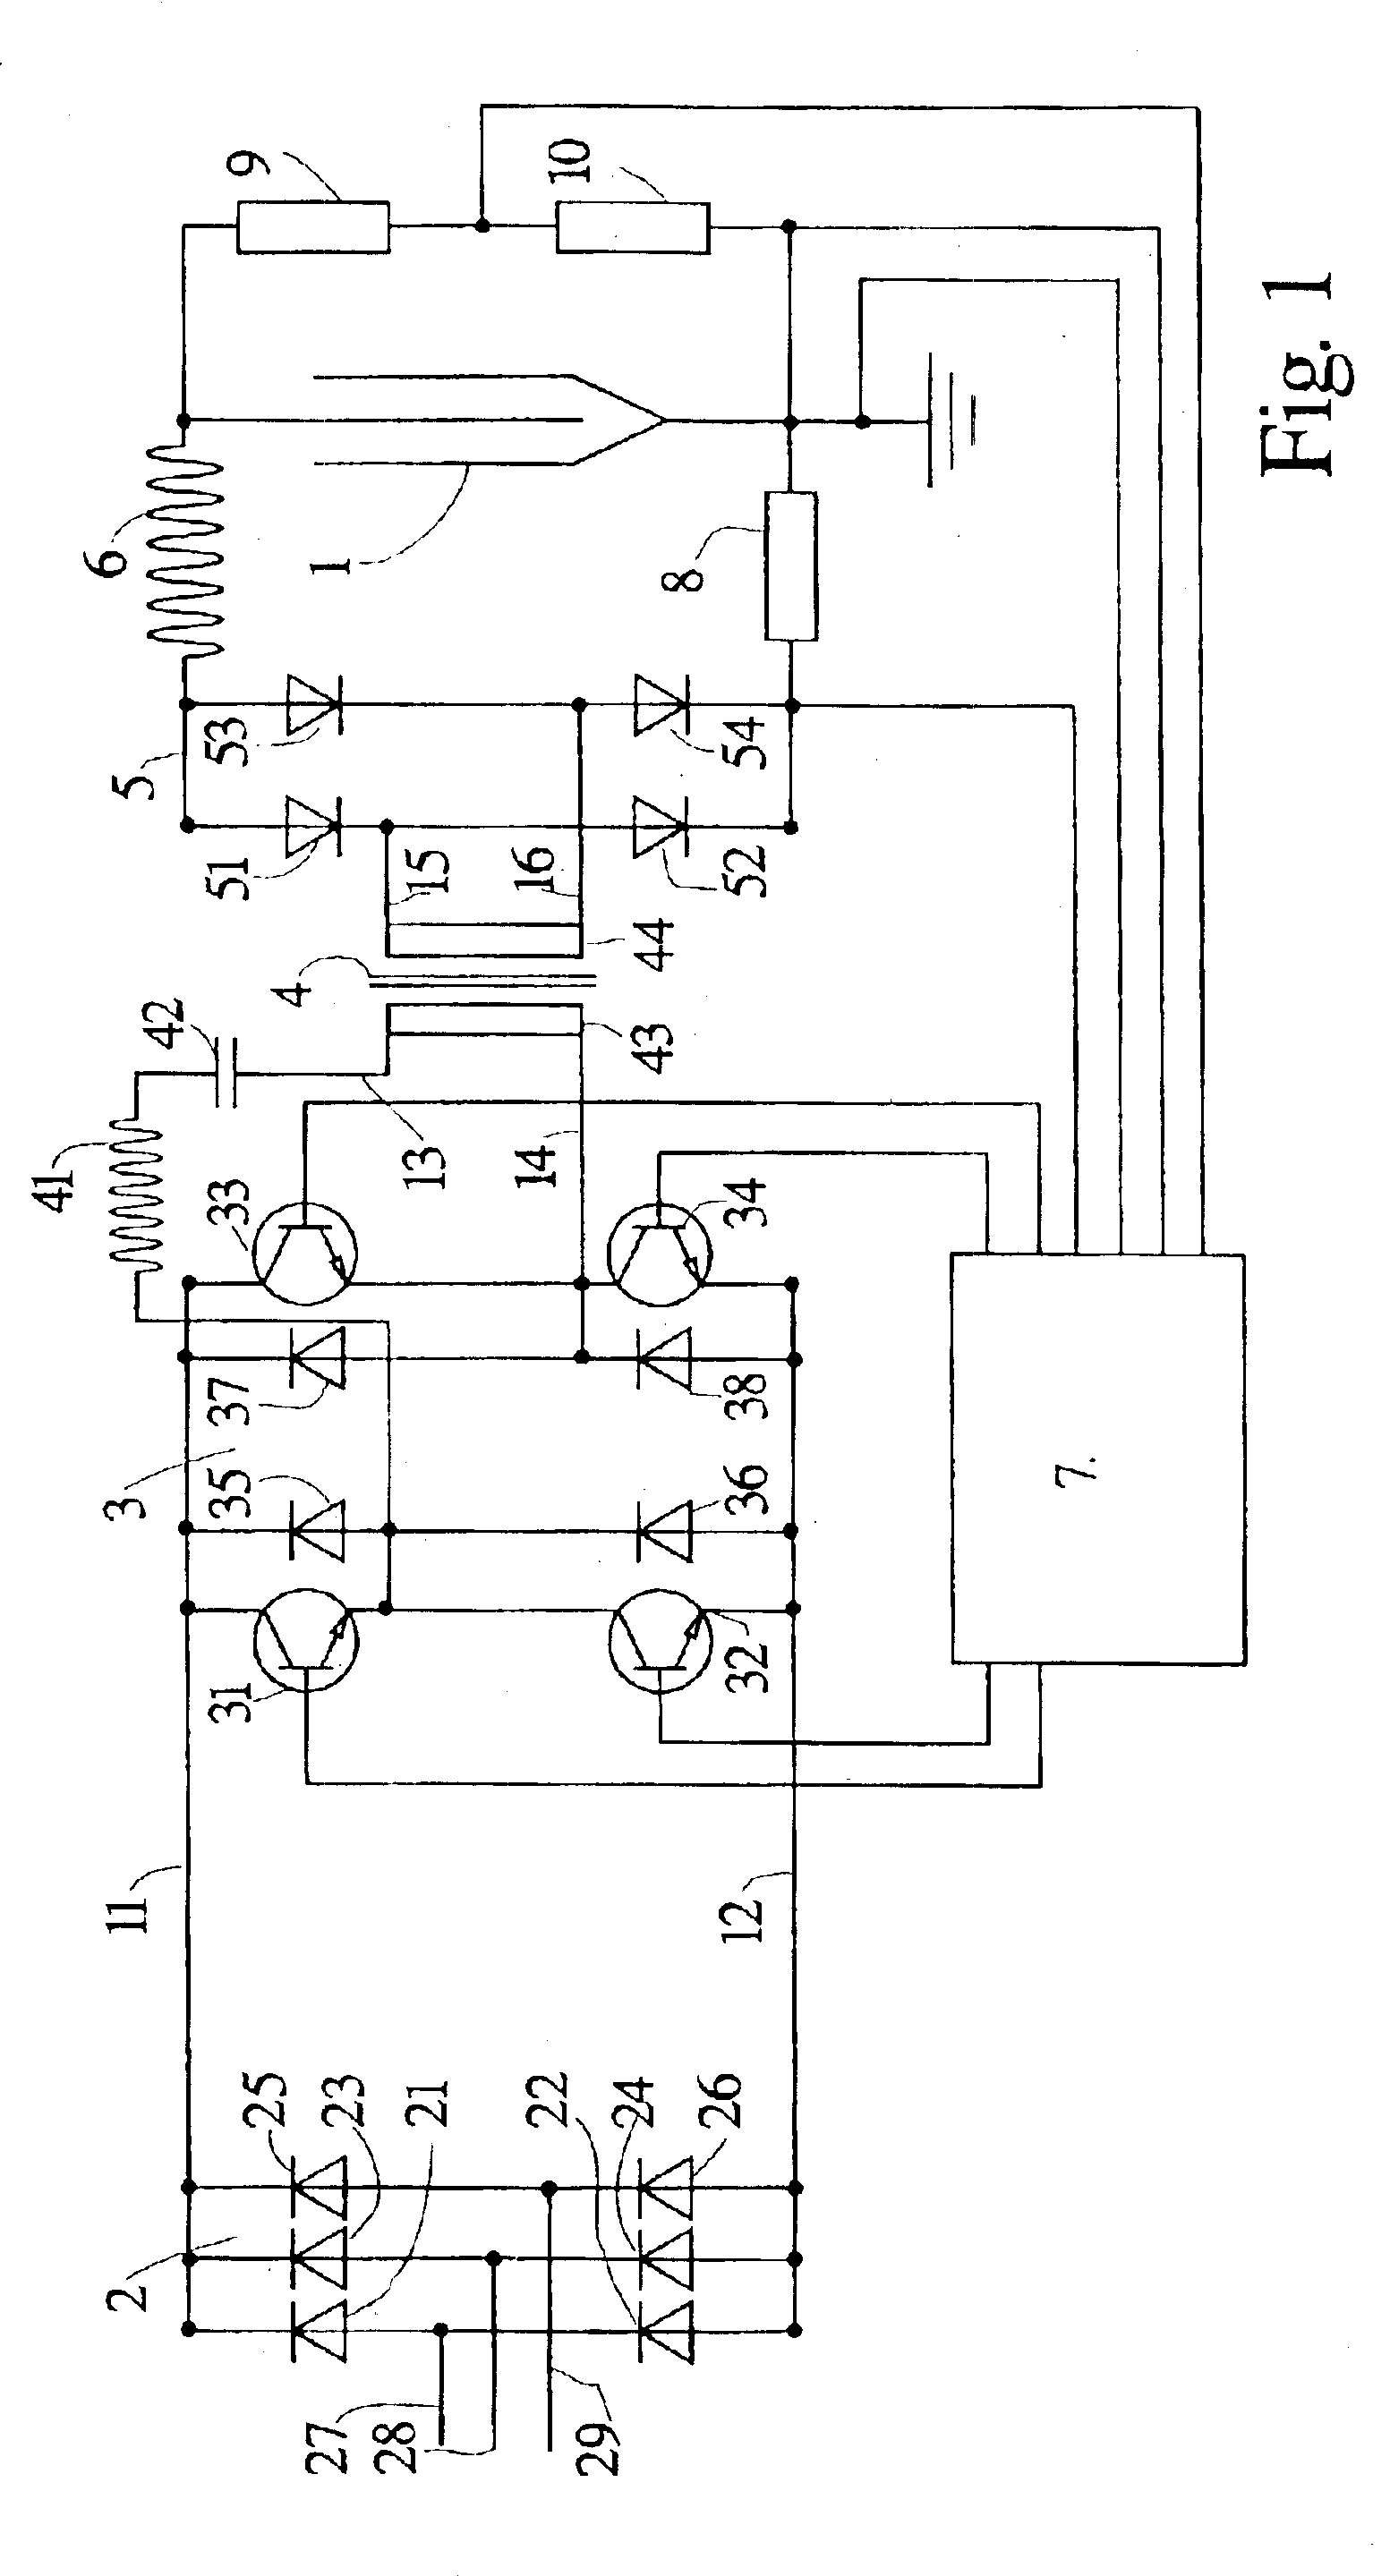 Method for protecting a DC generator against overvoltage